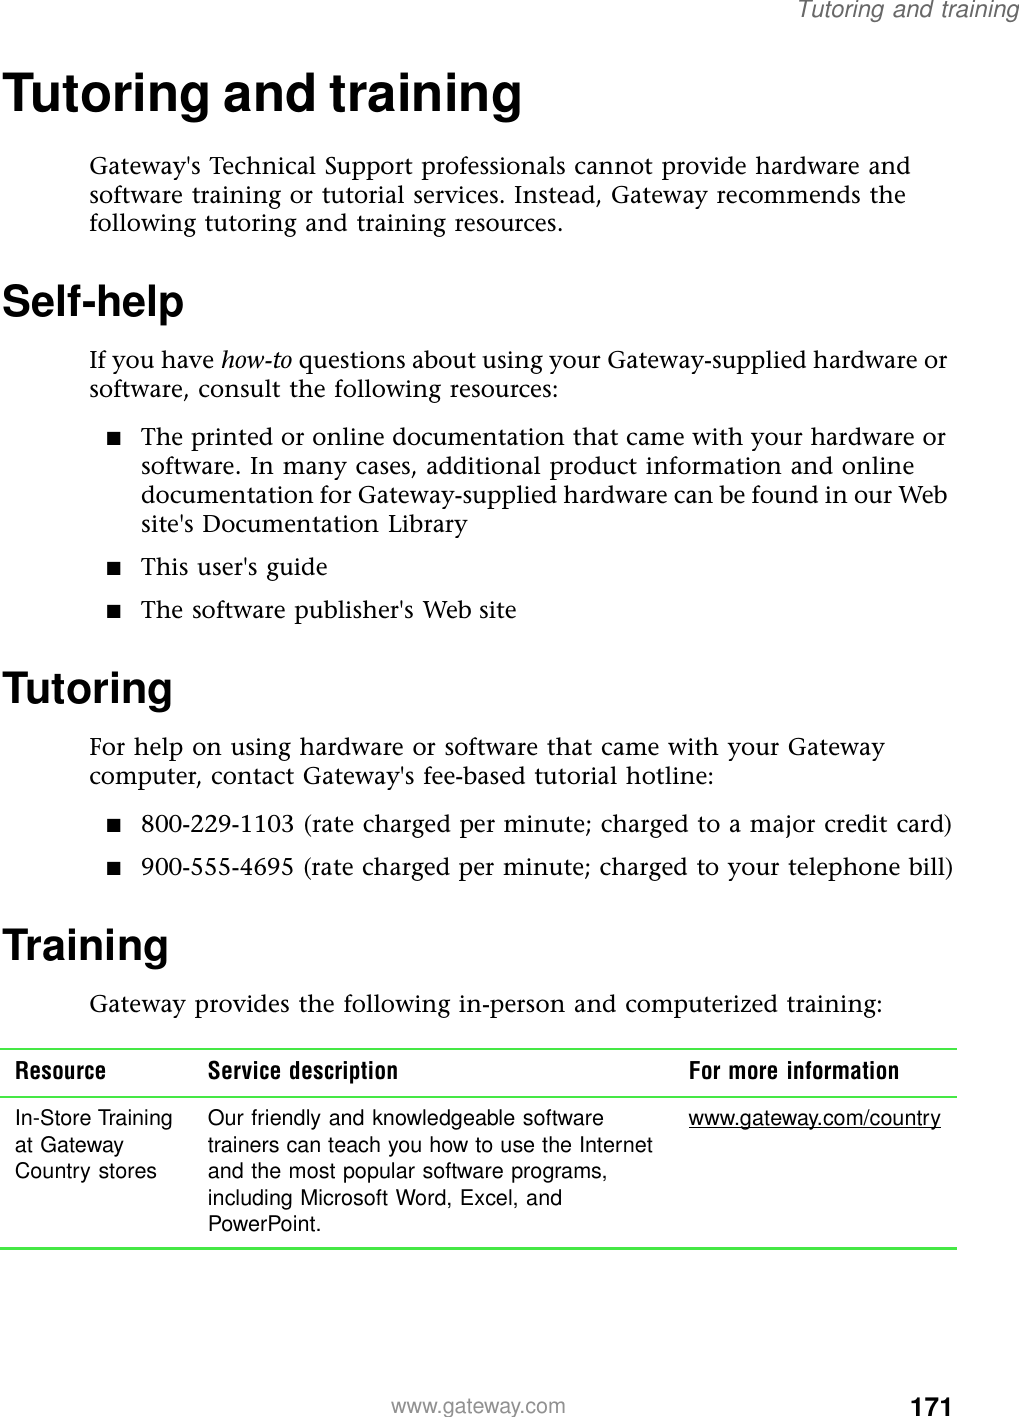 171Tutoring and trainingwww.gateway.comTutoring and trainingGateway&apos;s Technical Support professionals cannot provide hardware and software training or tutorial services. Instead, Gateway recommends the following tutoring and training resources.Self-helpIf you have how-to questions about using your Gateway-supplied hardware or software, consult the following resources:■The printed or online documentation that came with your hardware or software. In many cases, additional product information and online documentation for Gateway-supplied hardware can be found in our Web site&apos;s Documentation Library■This user&apos;s guide■The software publisher&apos;s Web siteTutoringFor help on using hardware or software that came with your Gateway computer, contact Gateway&apos;s fee-based tutorial hotline:■800-229-1103 (rate charged per minute; charged to a major credit card)■900-555-4695 (rate charged per minute; charged to your telephone bill)TrainingGateway provides the following in-person and computerized training:Resource Service description For more informationIn-Store Training at Gateway Country storesOur friendly and knowledgeable software trainers can teach you how to use the Internet and the most popular software programs, including Microsoft Word, Excel, and PowerPoint.www.gateway.com/country